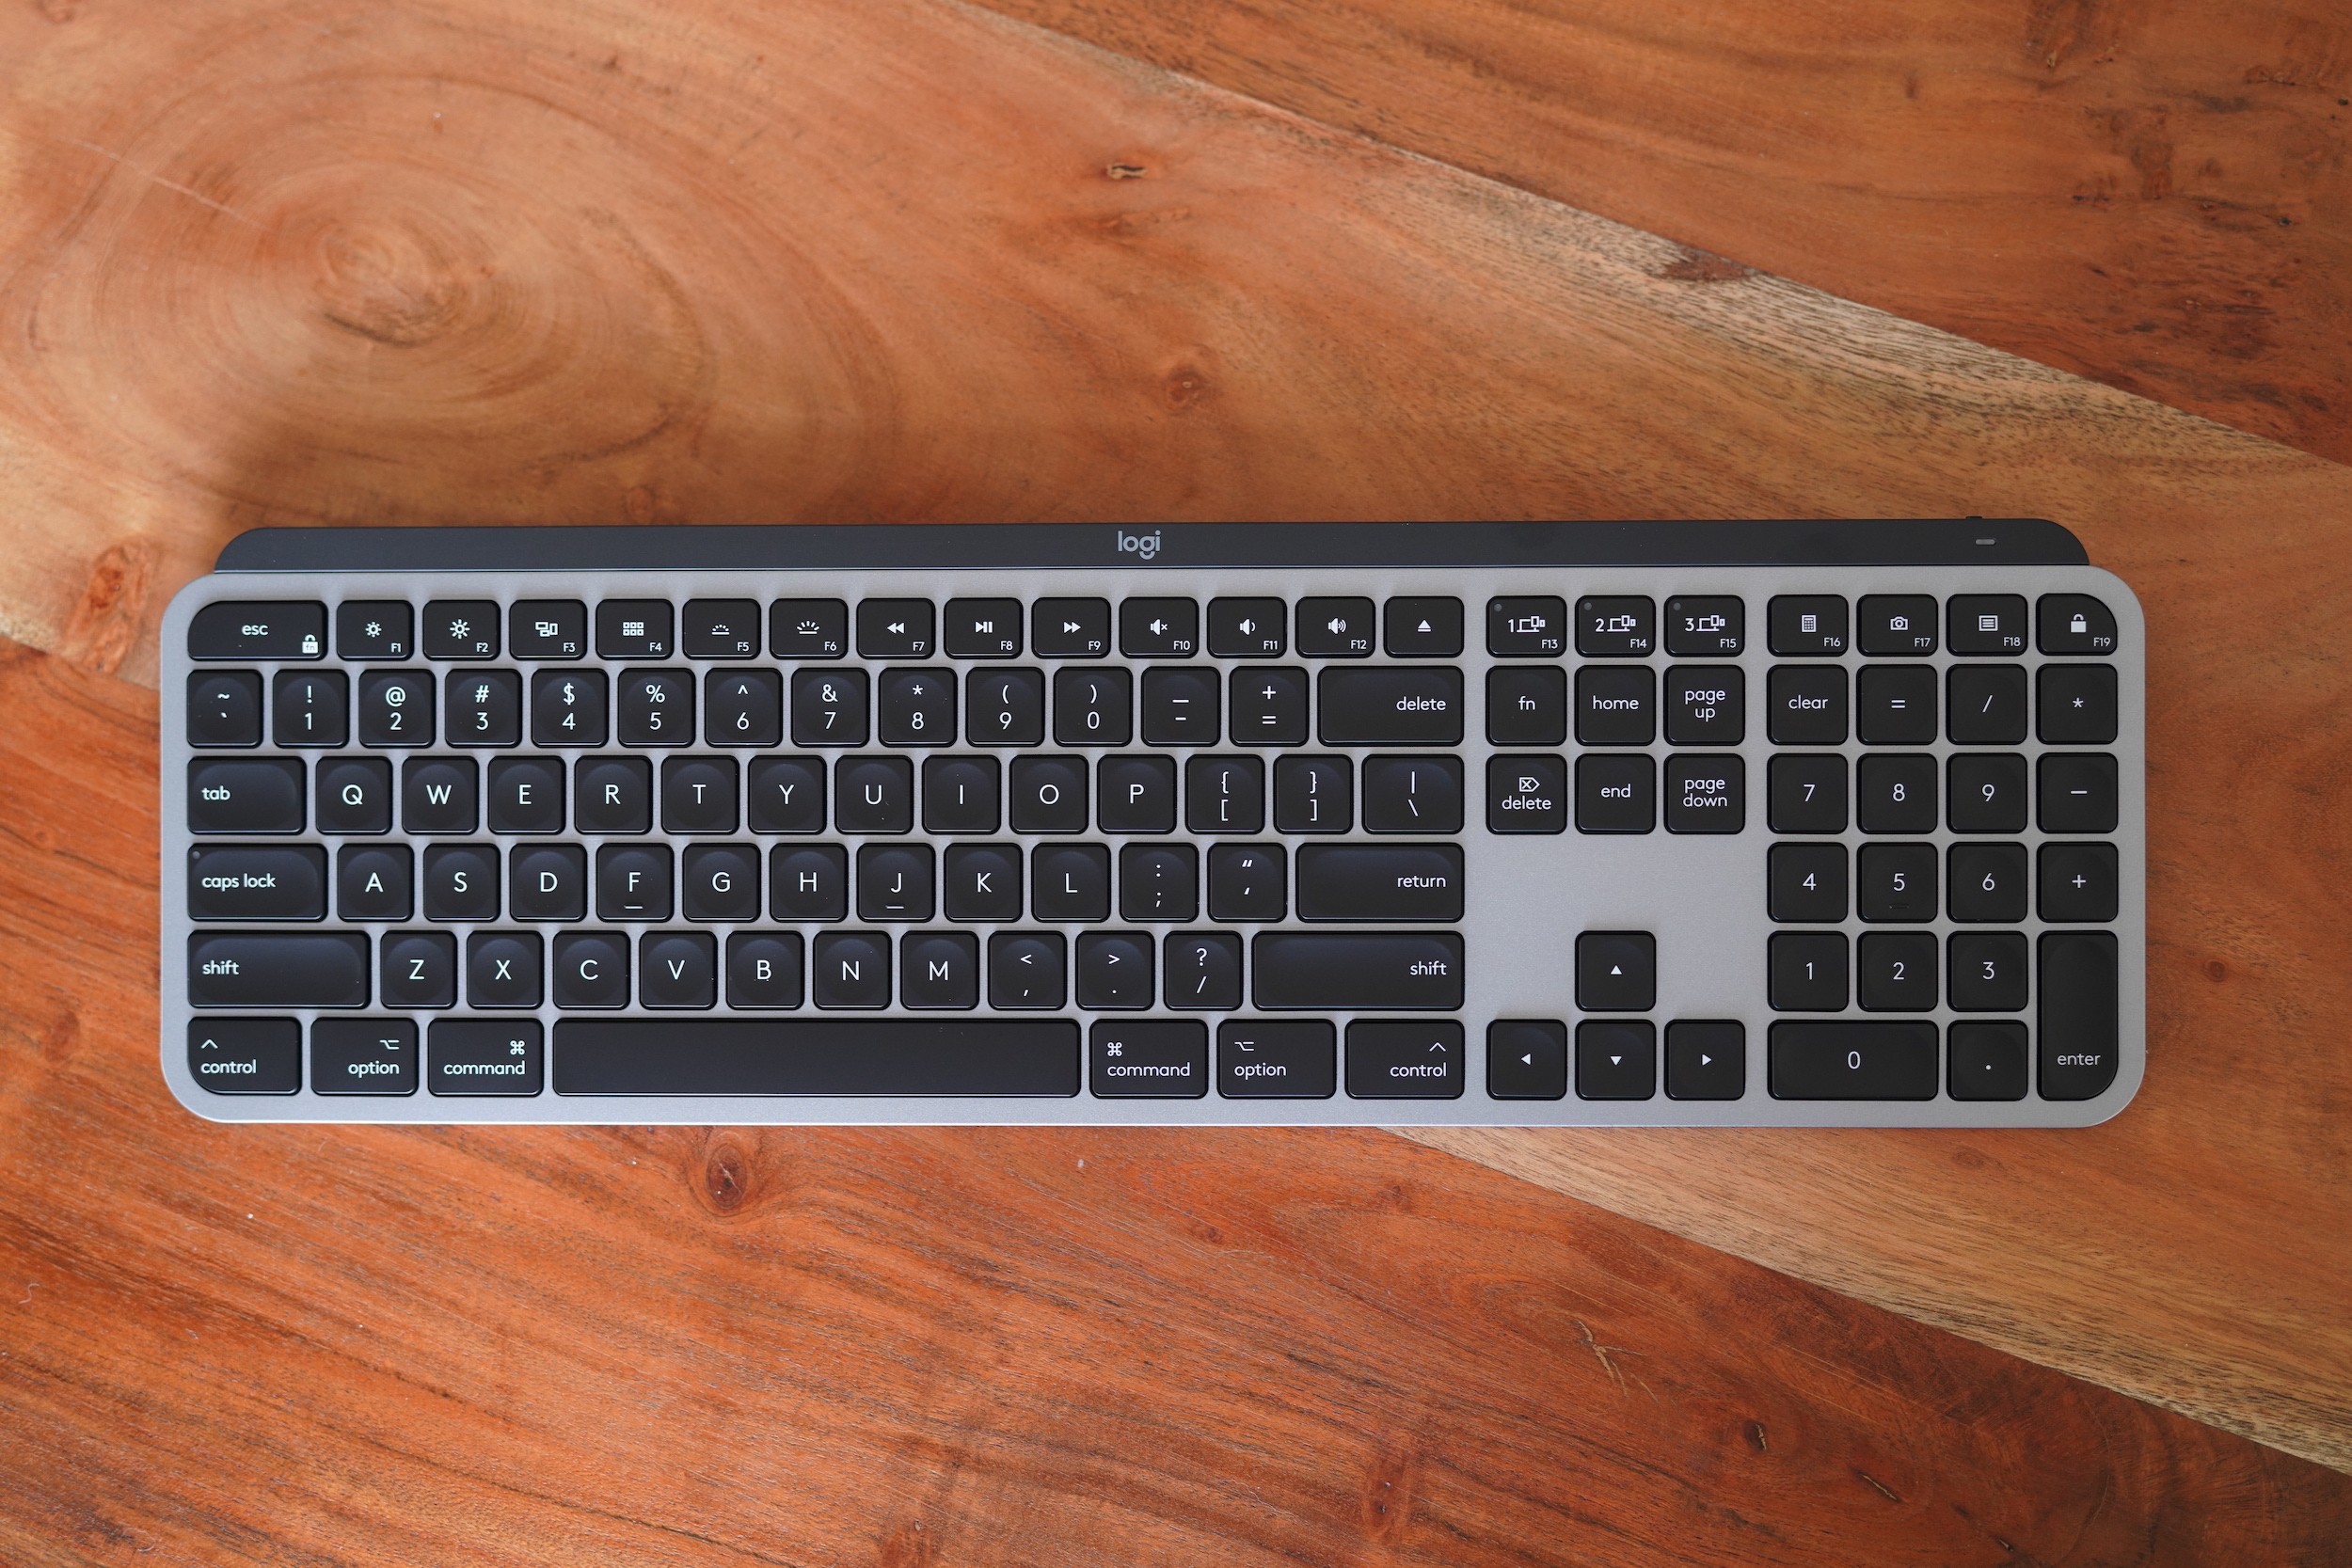 Logitech’s new Mac-specific mouse and keyboards are the new best choices for Mac input devices